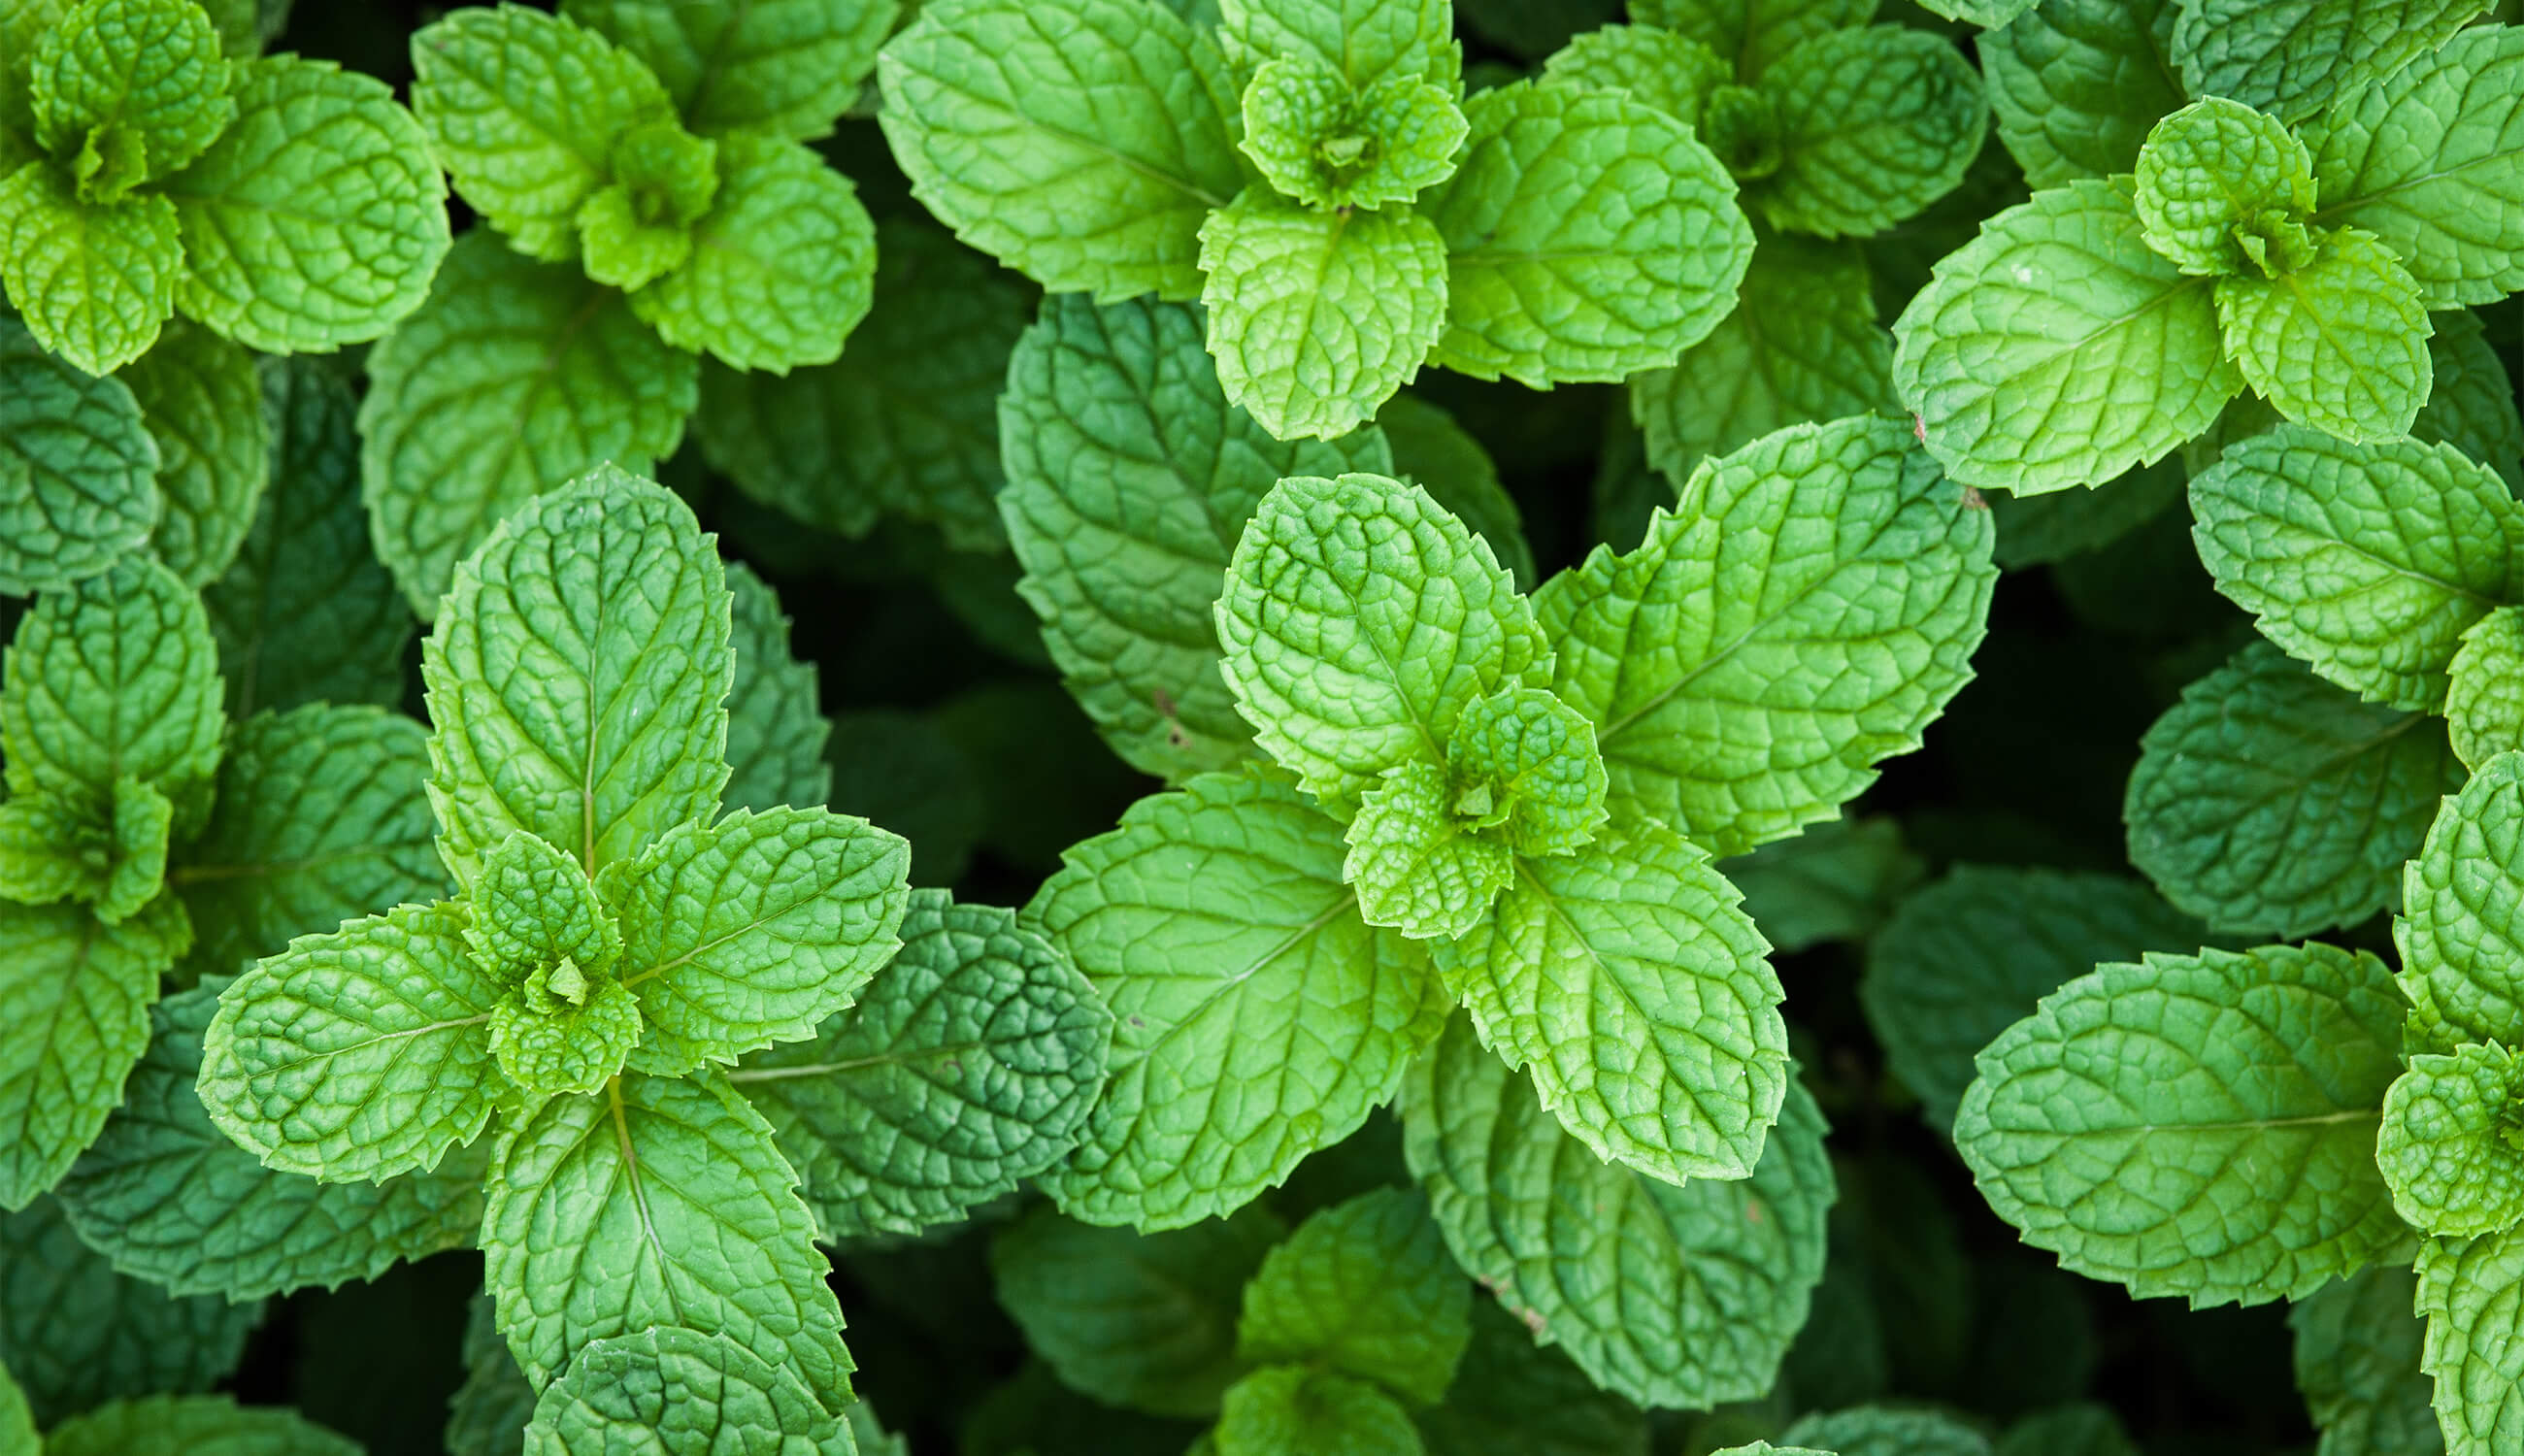 Peppermint soothes skin irritations, reduces excess oil, cooling sensation